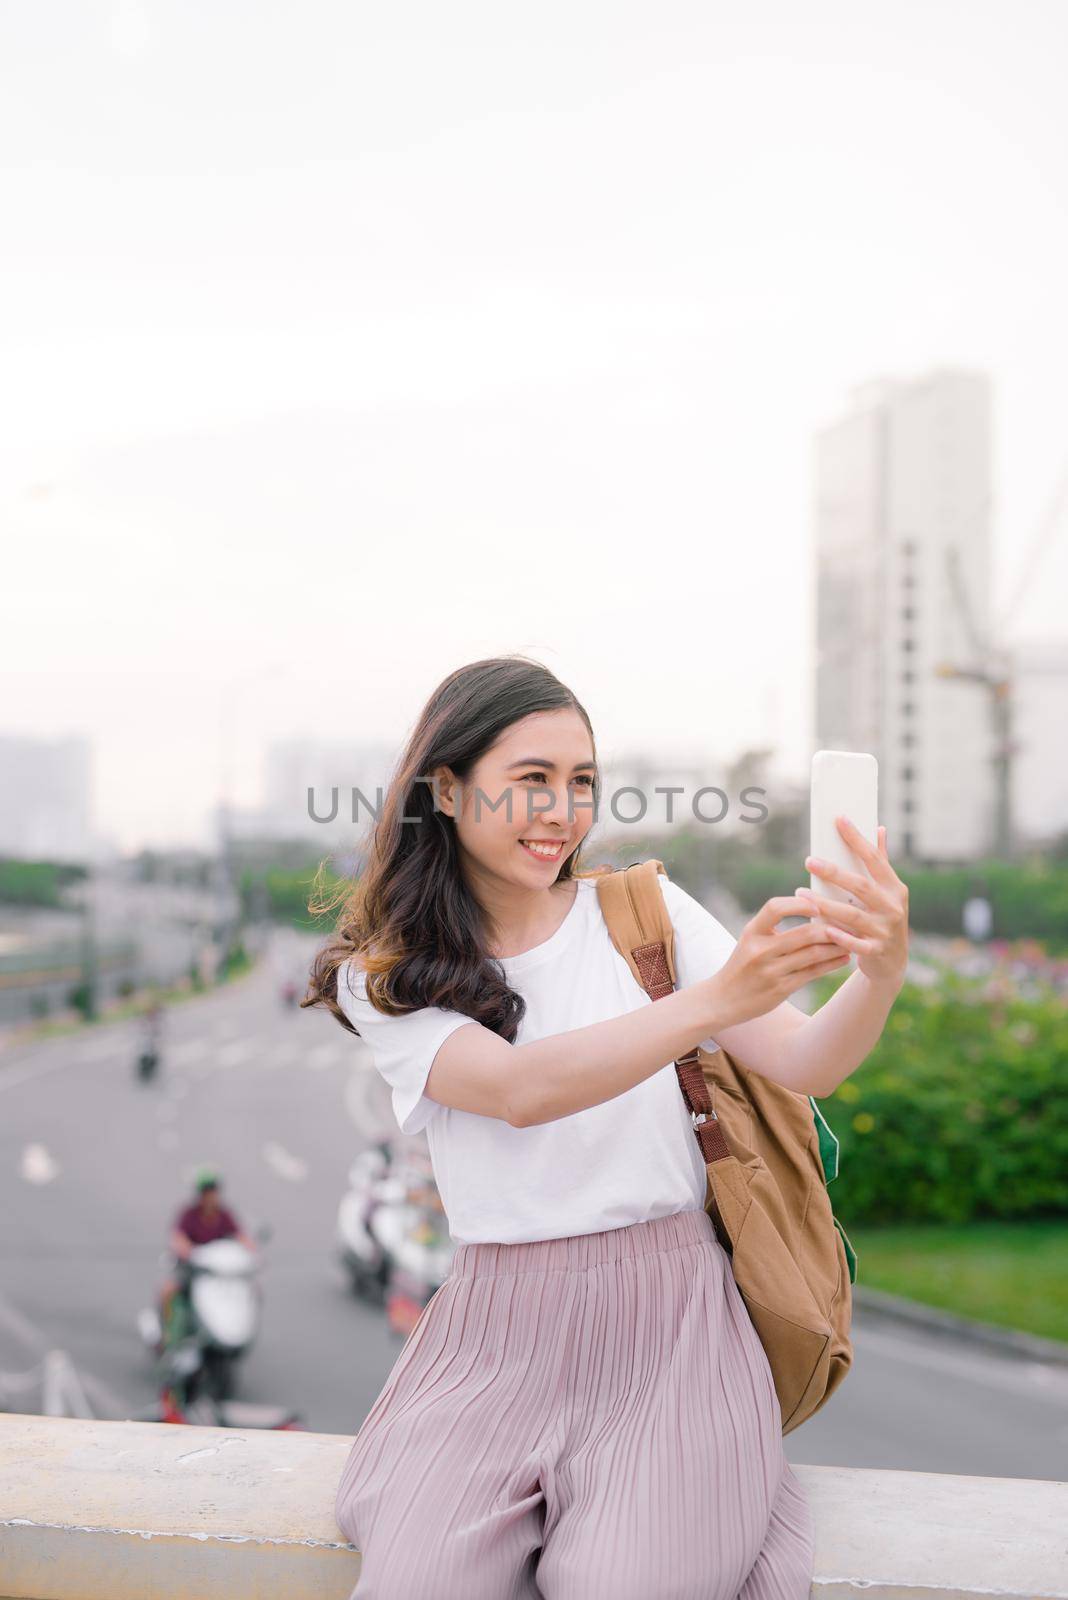 Young beautiful with long hairstyle woman taking selfie outdoor.